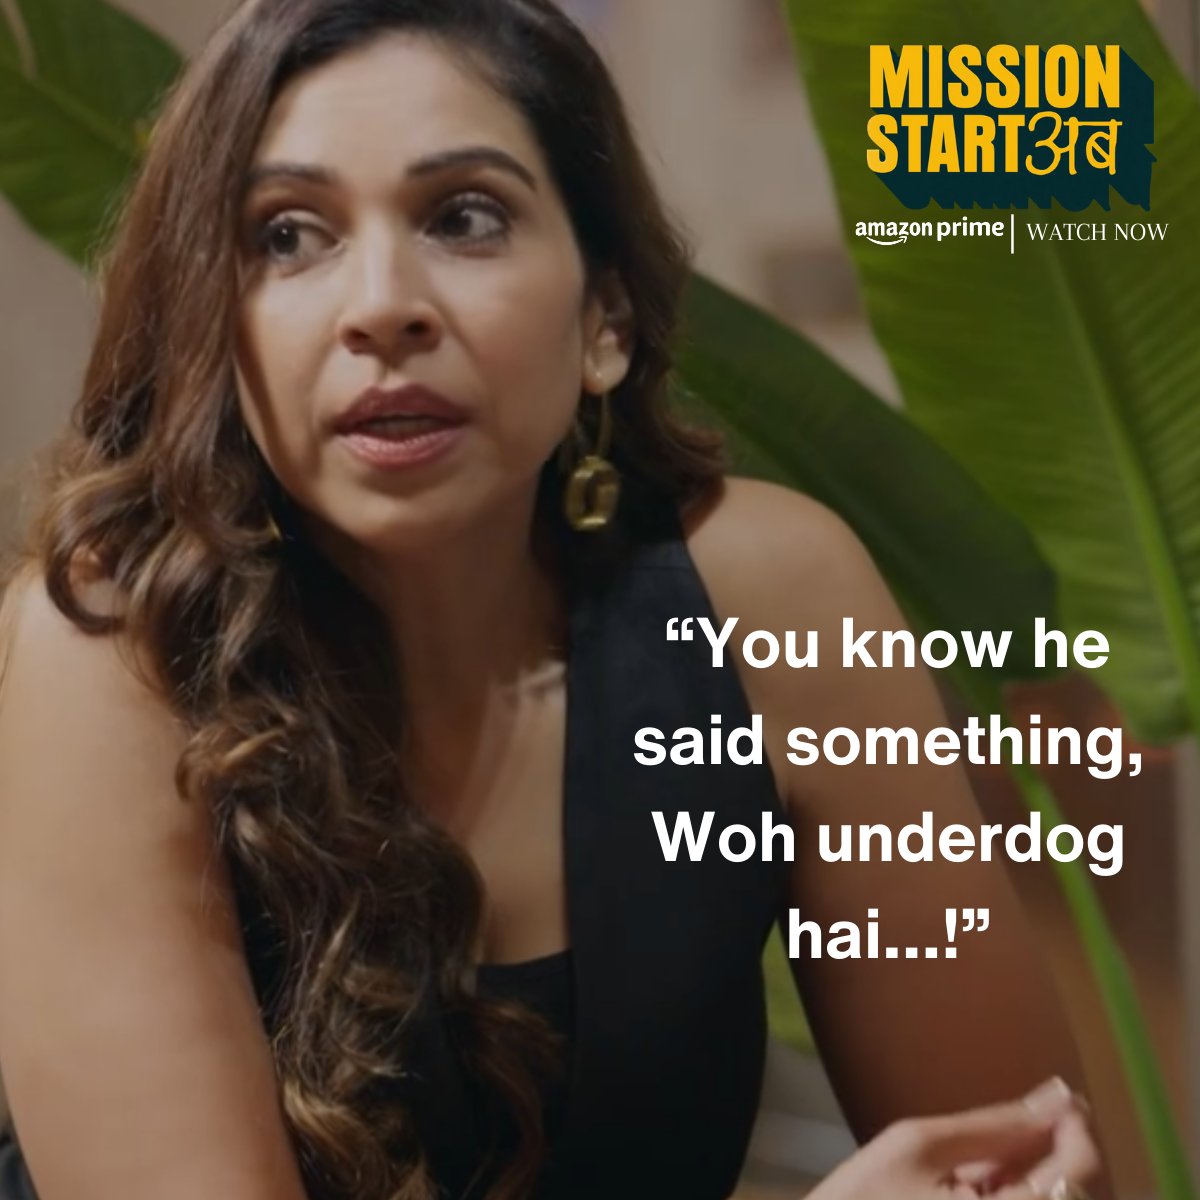 Redesyn's Big Break Challenge! | Mission Start Ab | Episode 2

Our investors resonating with discussions that echo our potential.

#Missionstartab #startups #Entrepreneurship